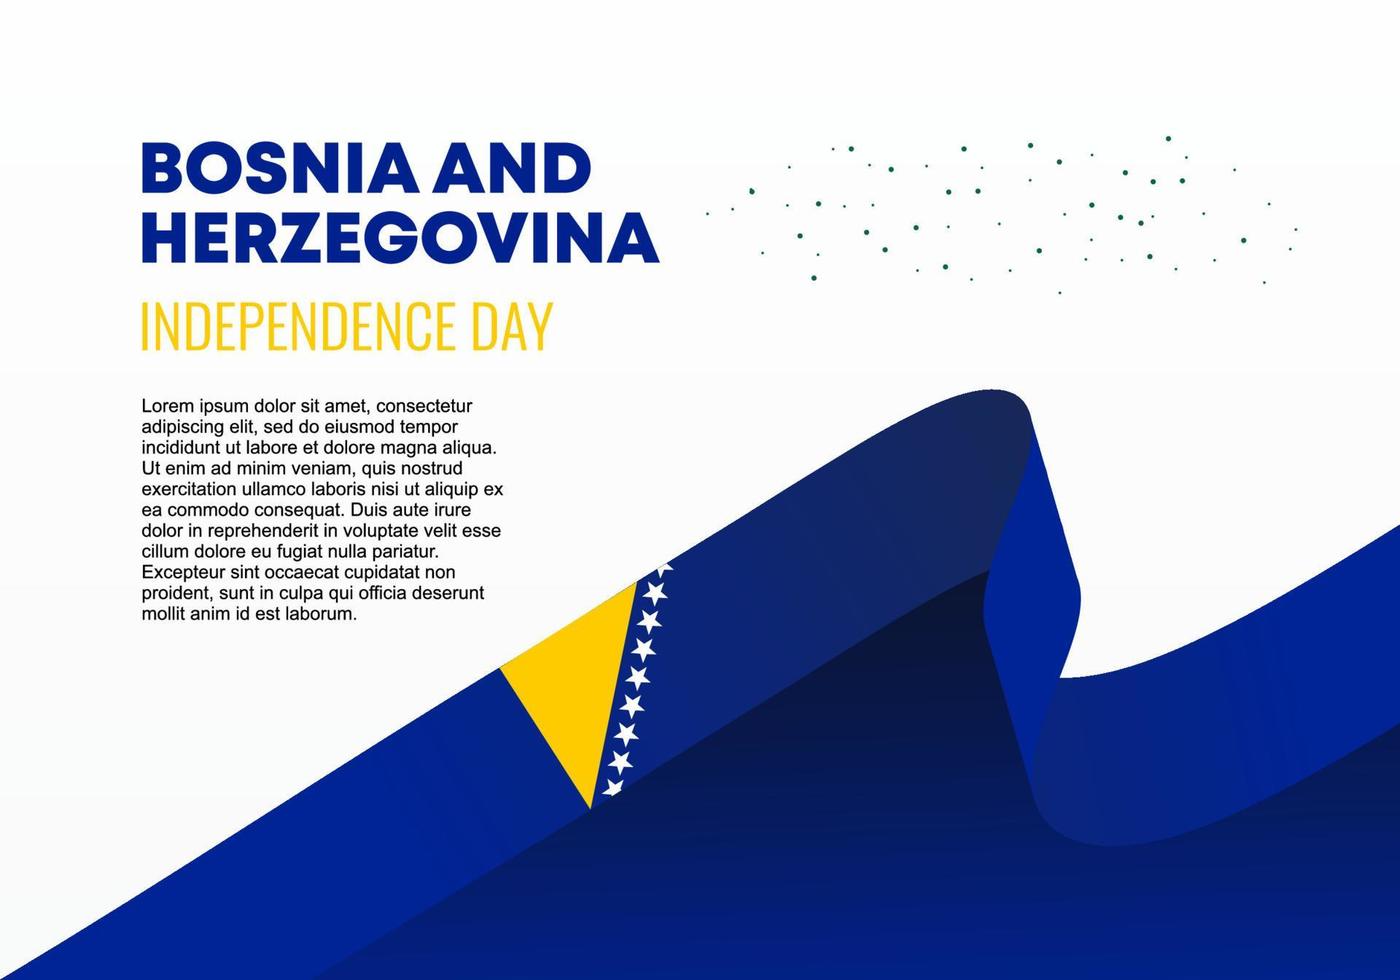 Bosnia Herzegovina independence day background on March 1 st. vector